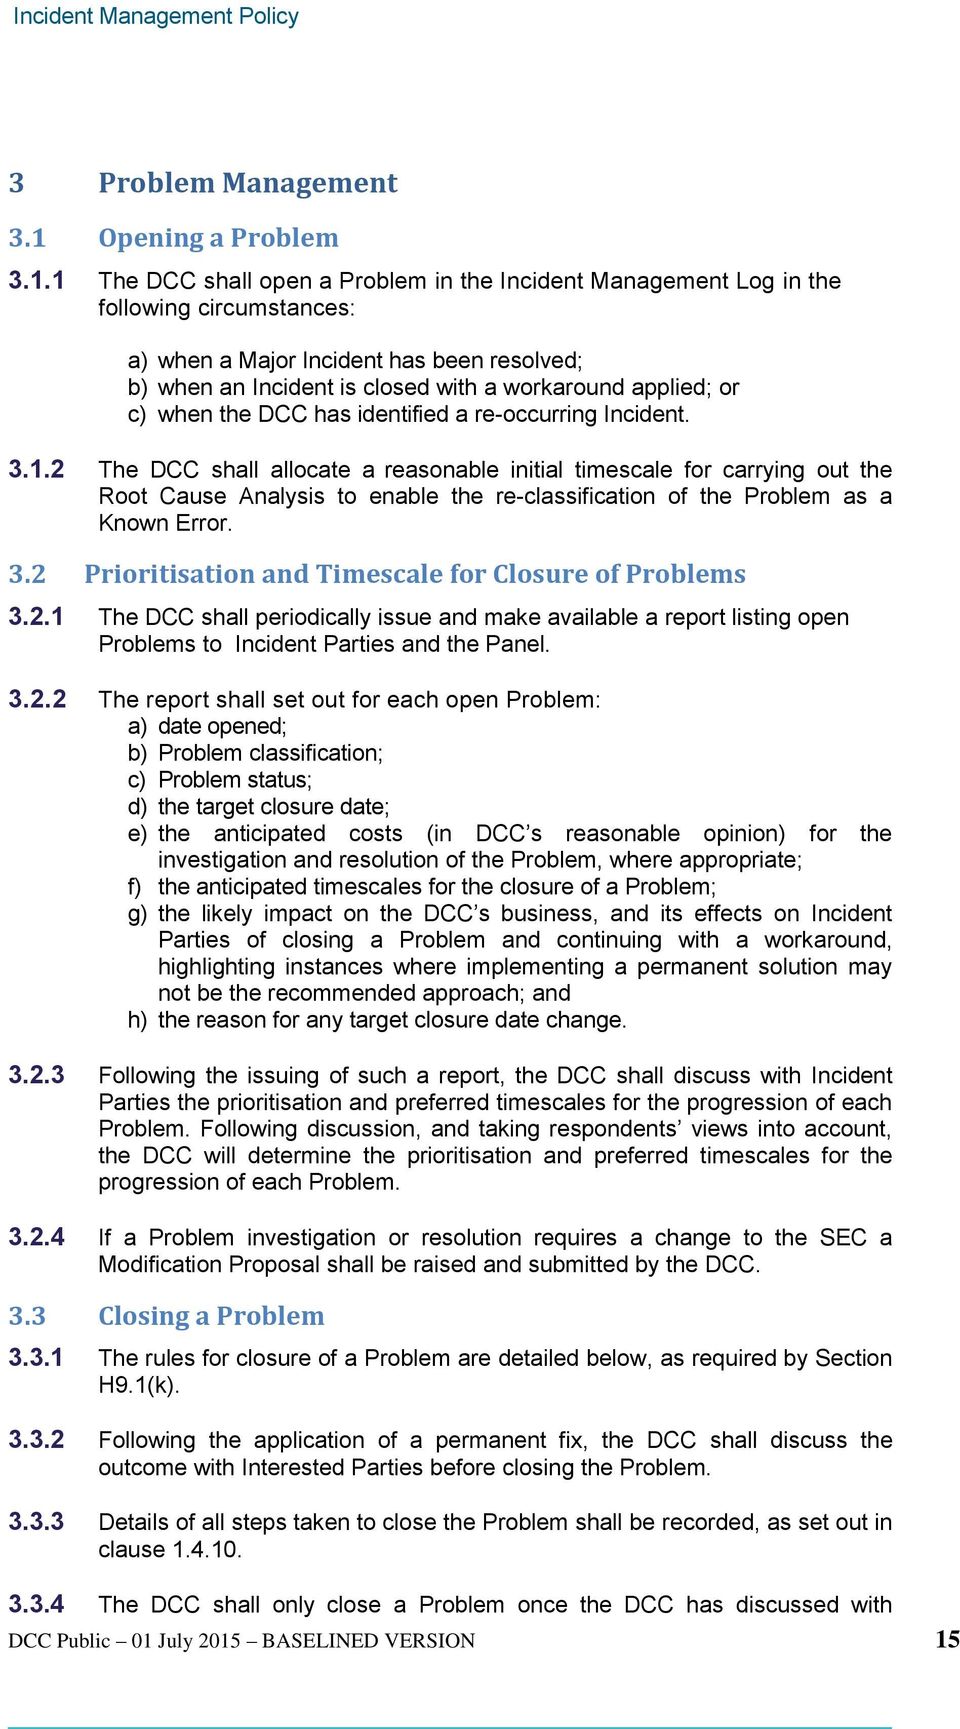 1 The DCC shall open a Problem in the Incident Management Log in the following circumstances: a) when a Major Incident has been resolved; b) when an Incident is closed with a workaround applied; or